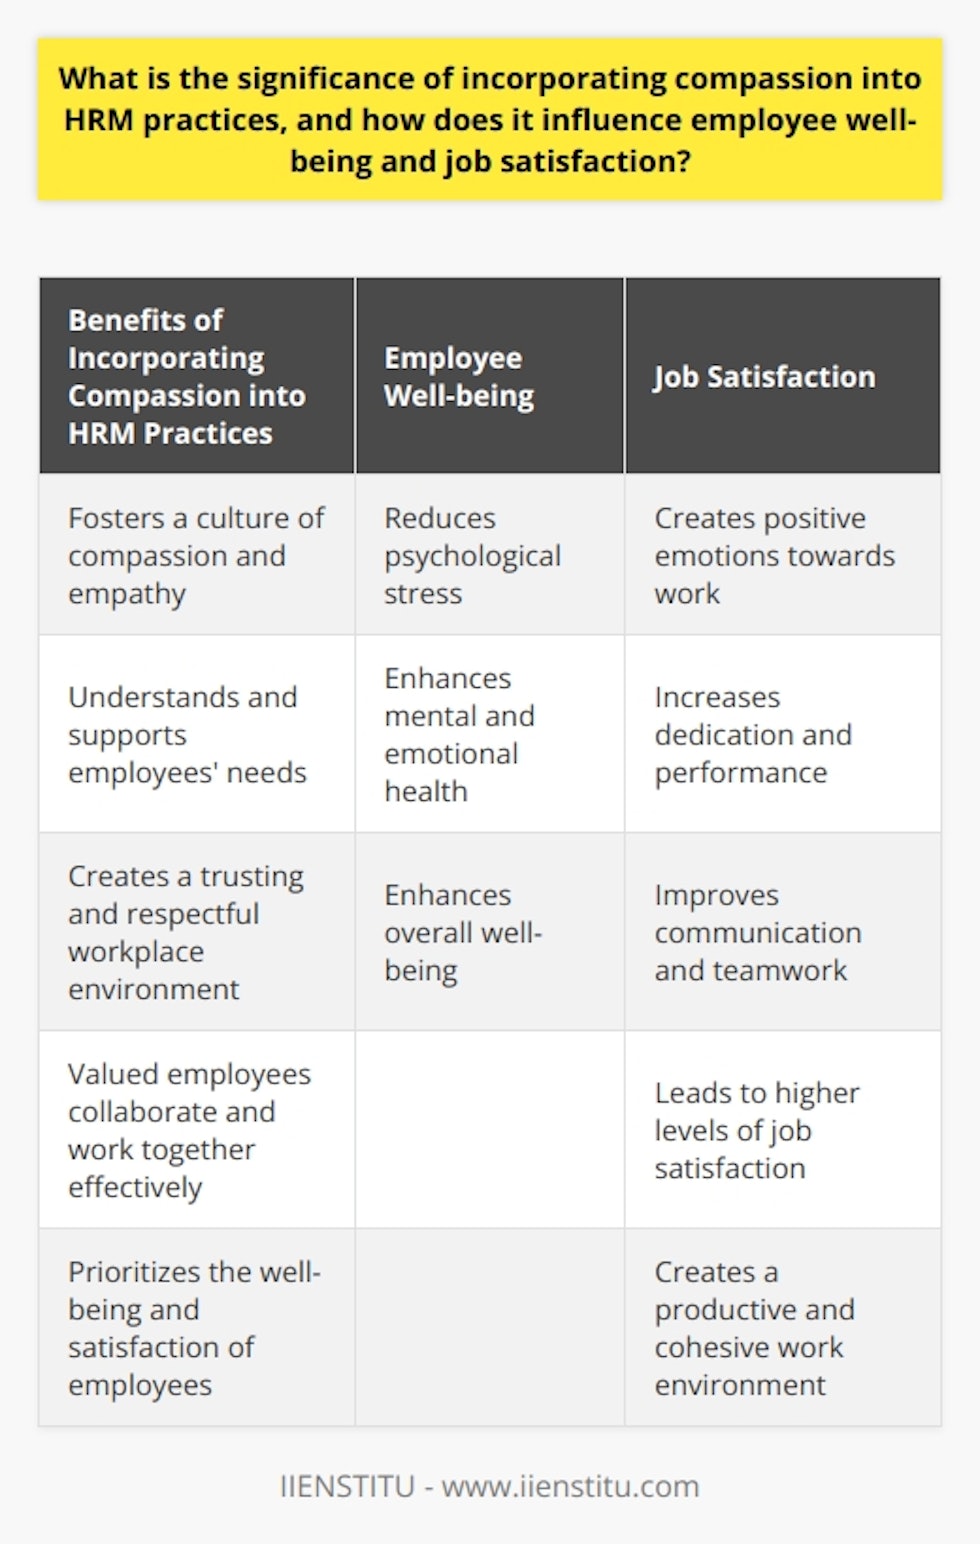 Incorporating compassion into HRM practices has significant benefits for both employees and the organization as a whole. By fostering a culture of compassion and empathy, HR professionals can better understand and support their employees' needs. This leads to several positive outcomes, such as improved employee well-being, increased job satisfaction, and a more productive and cohesive workforce.One of the main effects of practicing compassion in HRM is the positive impact it has on employee well-being. Compassion involves acknowledging and sympathizing with employees' personal struggles, which can help reduce psychological stress. When employees feel that their struggles are understood and supported, they experience a sense of safety and belonging. This, in turn, enhances their mental and emotional health, leading to greater overall well-being.In addition to well-being, compassion in HRM also influences job satisfaction. When employees feel cared for and supported by their organization, they develop positive emotions towards their work. They feel valued and appreciated, which results in higher levels of job satisfaction. Furthermore, perceiving their employers as compassionate and understanding enhances their dedication to their job and their overall performance.Compassionate HRM practices also pave the way for a more productive and cohesive workforce. When employees feel valued, respected, and understood, they are more likely to collaborate and work together effectively. A compassionate approach creates a trusting and respectful workplace environment, where employees feel comfortable expressing their ideas and concerns. This leads to improved communication, teamwork, and overall organizational productivity.In conclusion, incorporating compassion into HRM practices is of utmost importance. It not only improves employee well-being and job satisfaction but also enhances overall workforce productivity. Organizations should prioritize compassion as an integral part of their HRM practices in order to create a positive and supportive work culture. By prioritizing compassion, organizations can ensure the well-being and satisfaction of their employees while also fostering a productive and cohesive work environment.